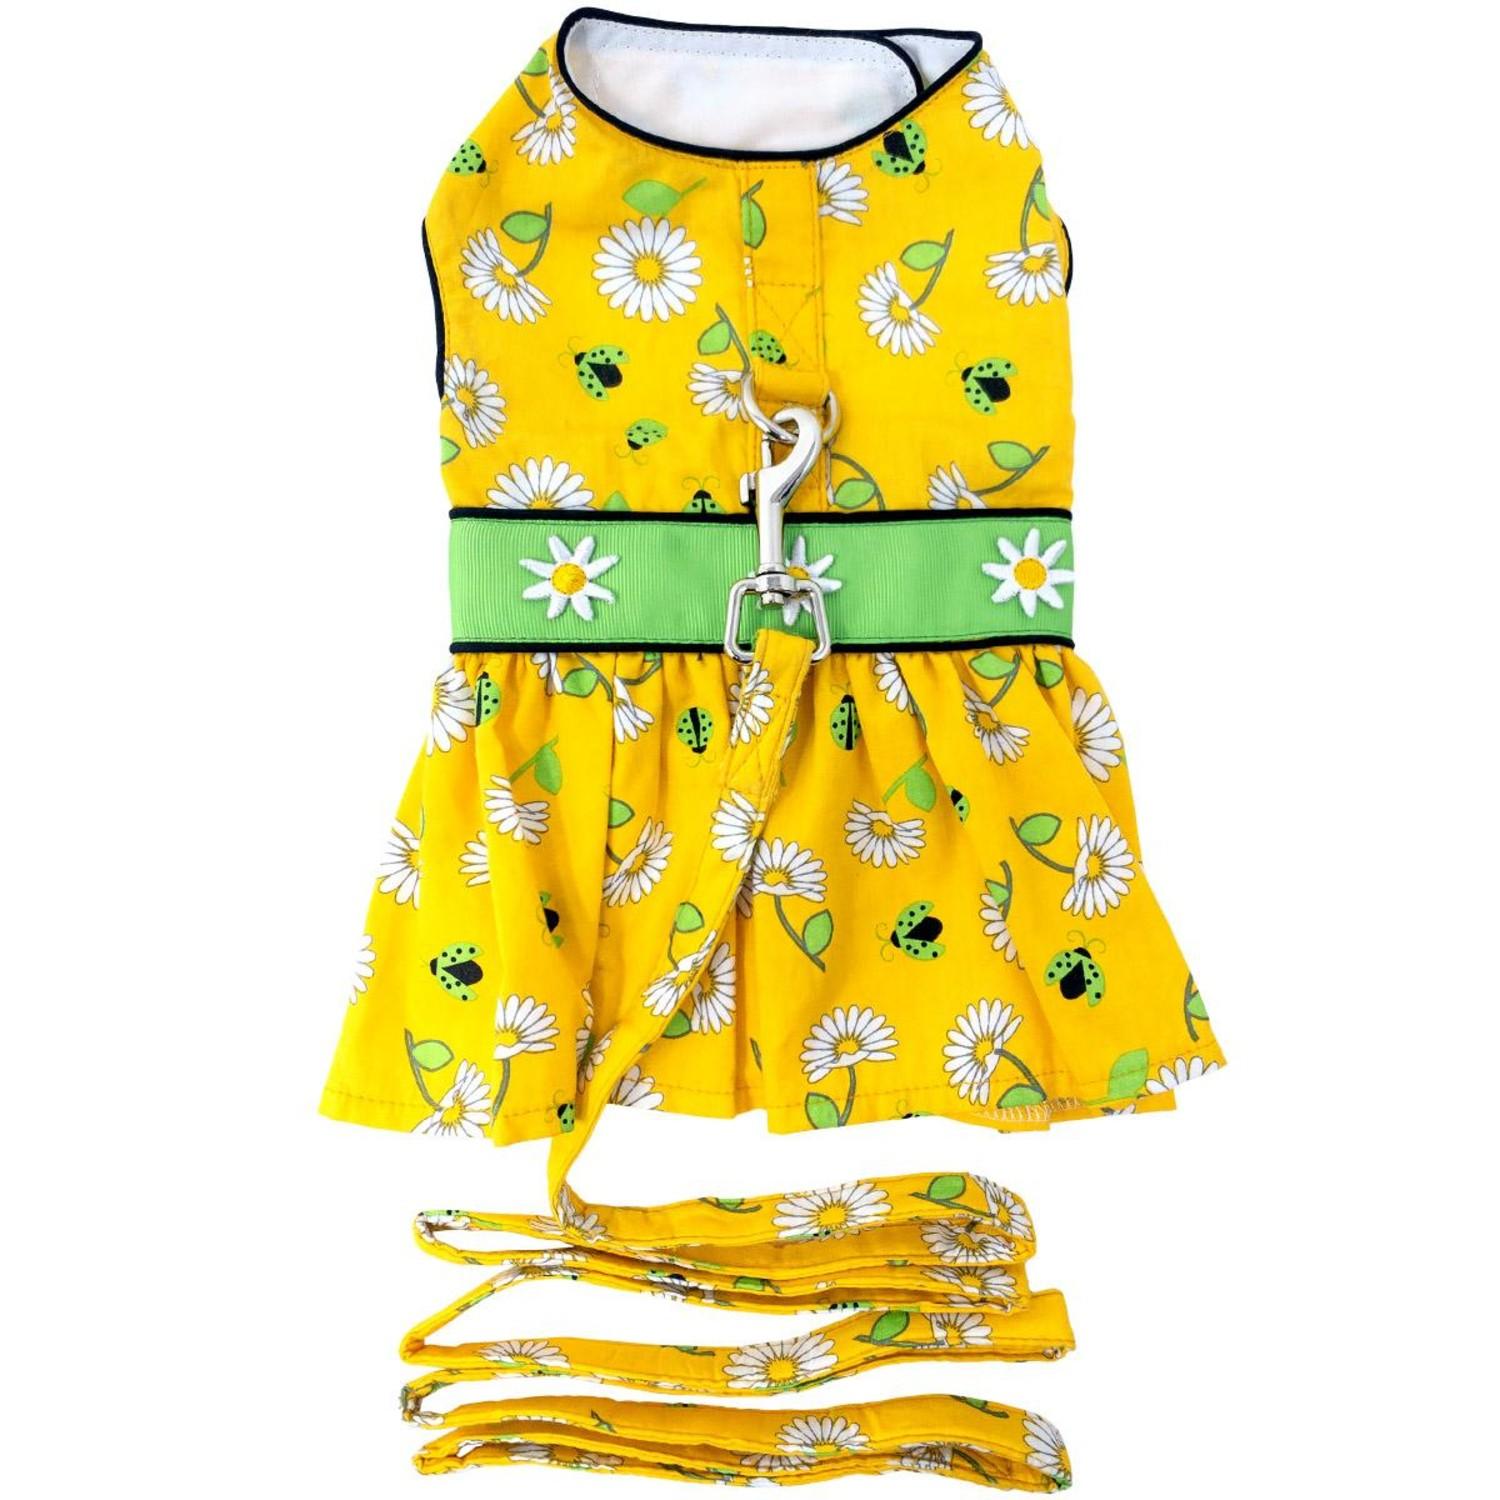 Ladybugs and Daisies Dog Harness Dress with Leash by Doggie Design